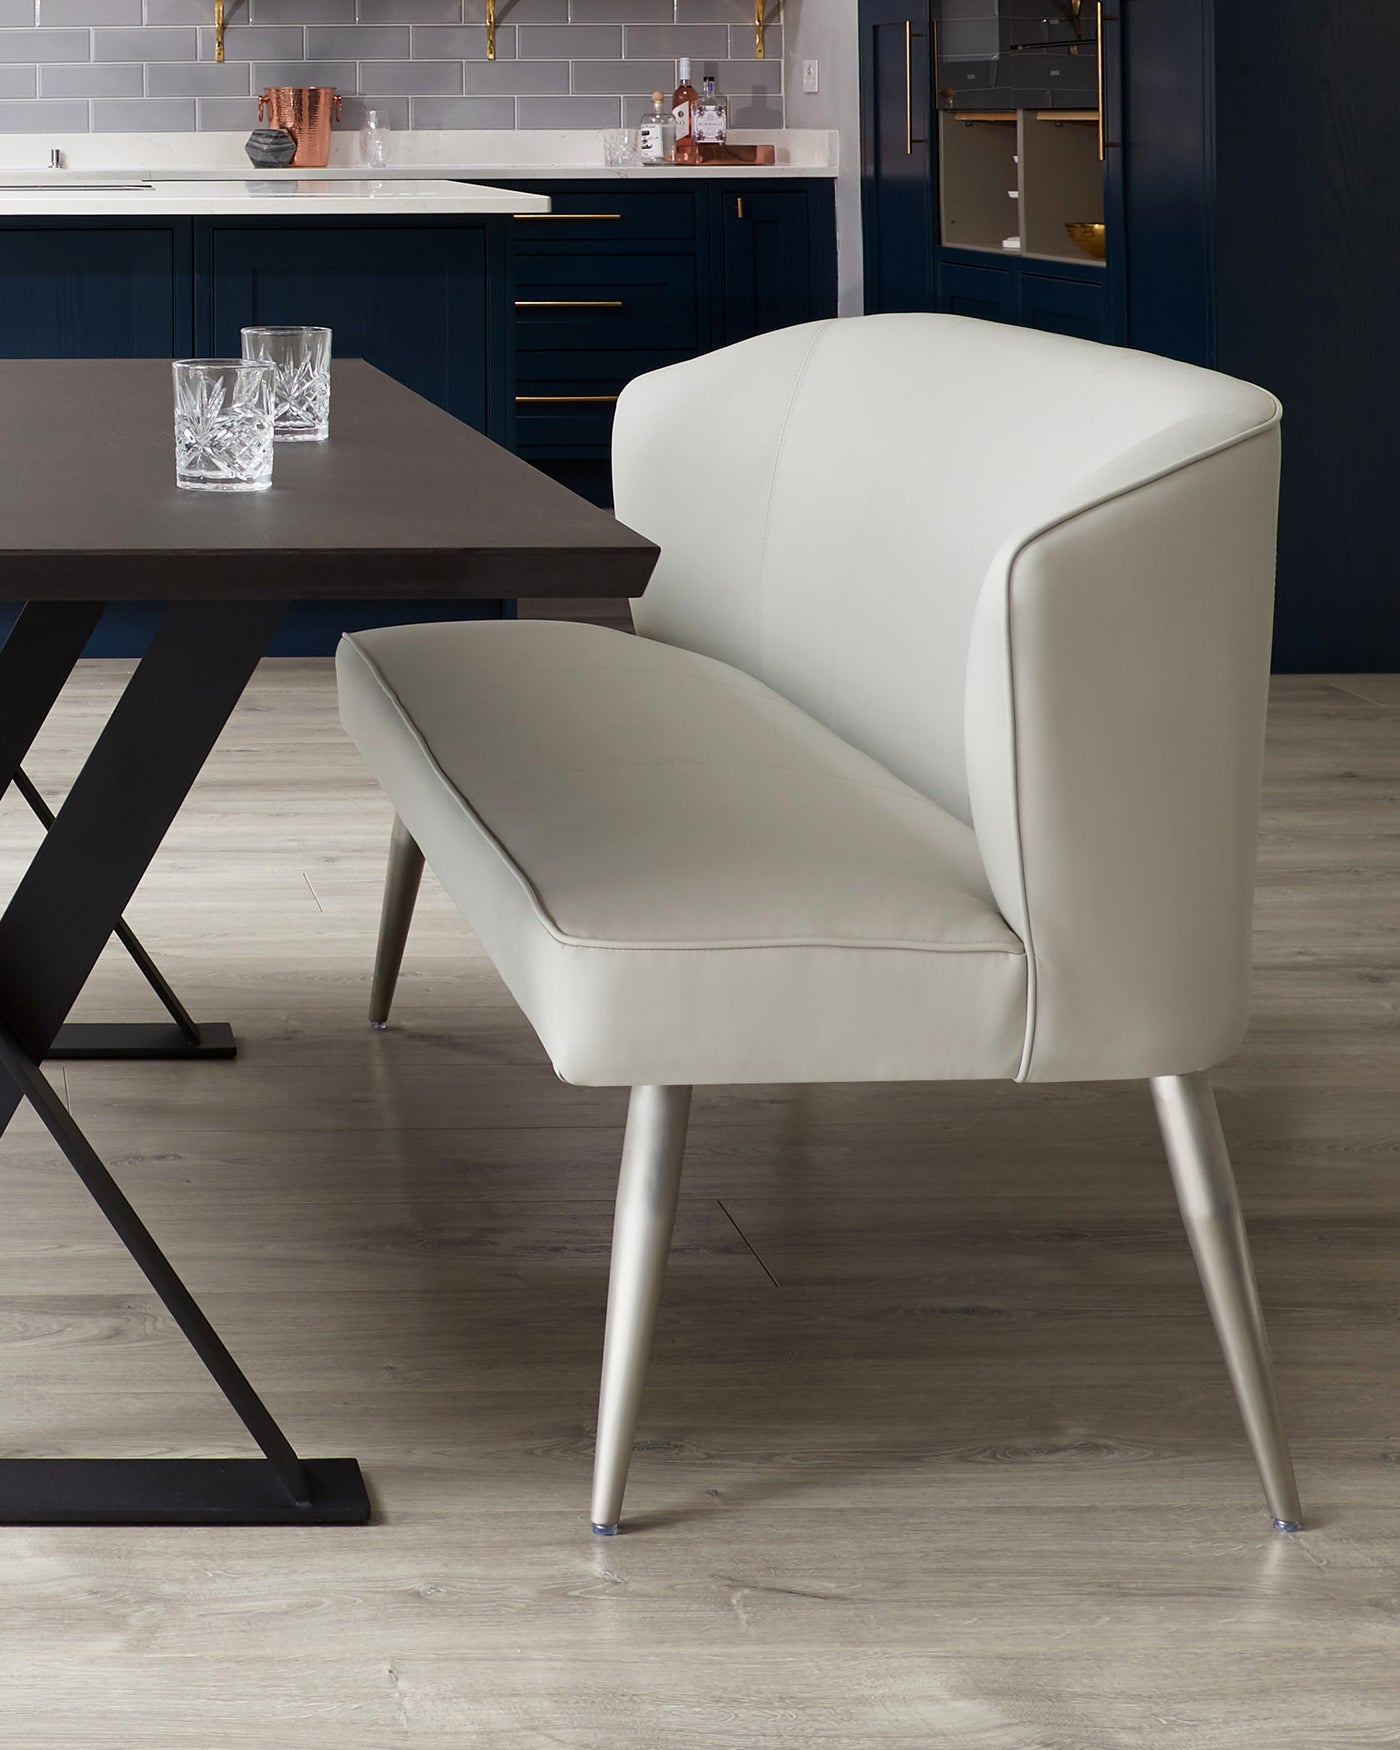 Modern minimalist dining chair with beige leather upholstery and sleek, slender metal legs. The chair features a curved backrest for comfortable seating, complementing a dark wooden dining table in the background.